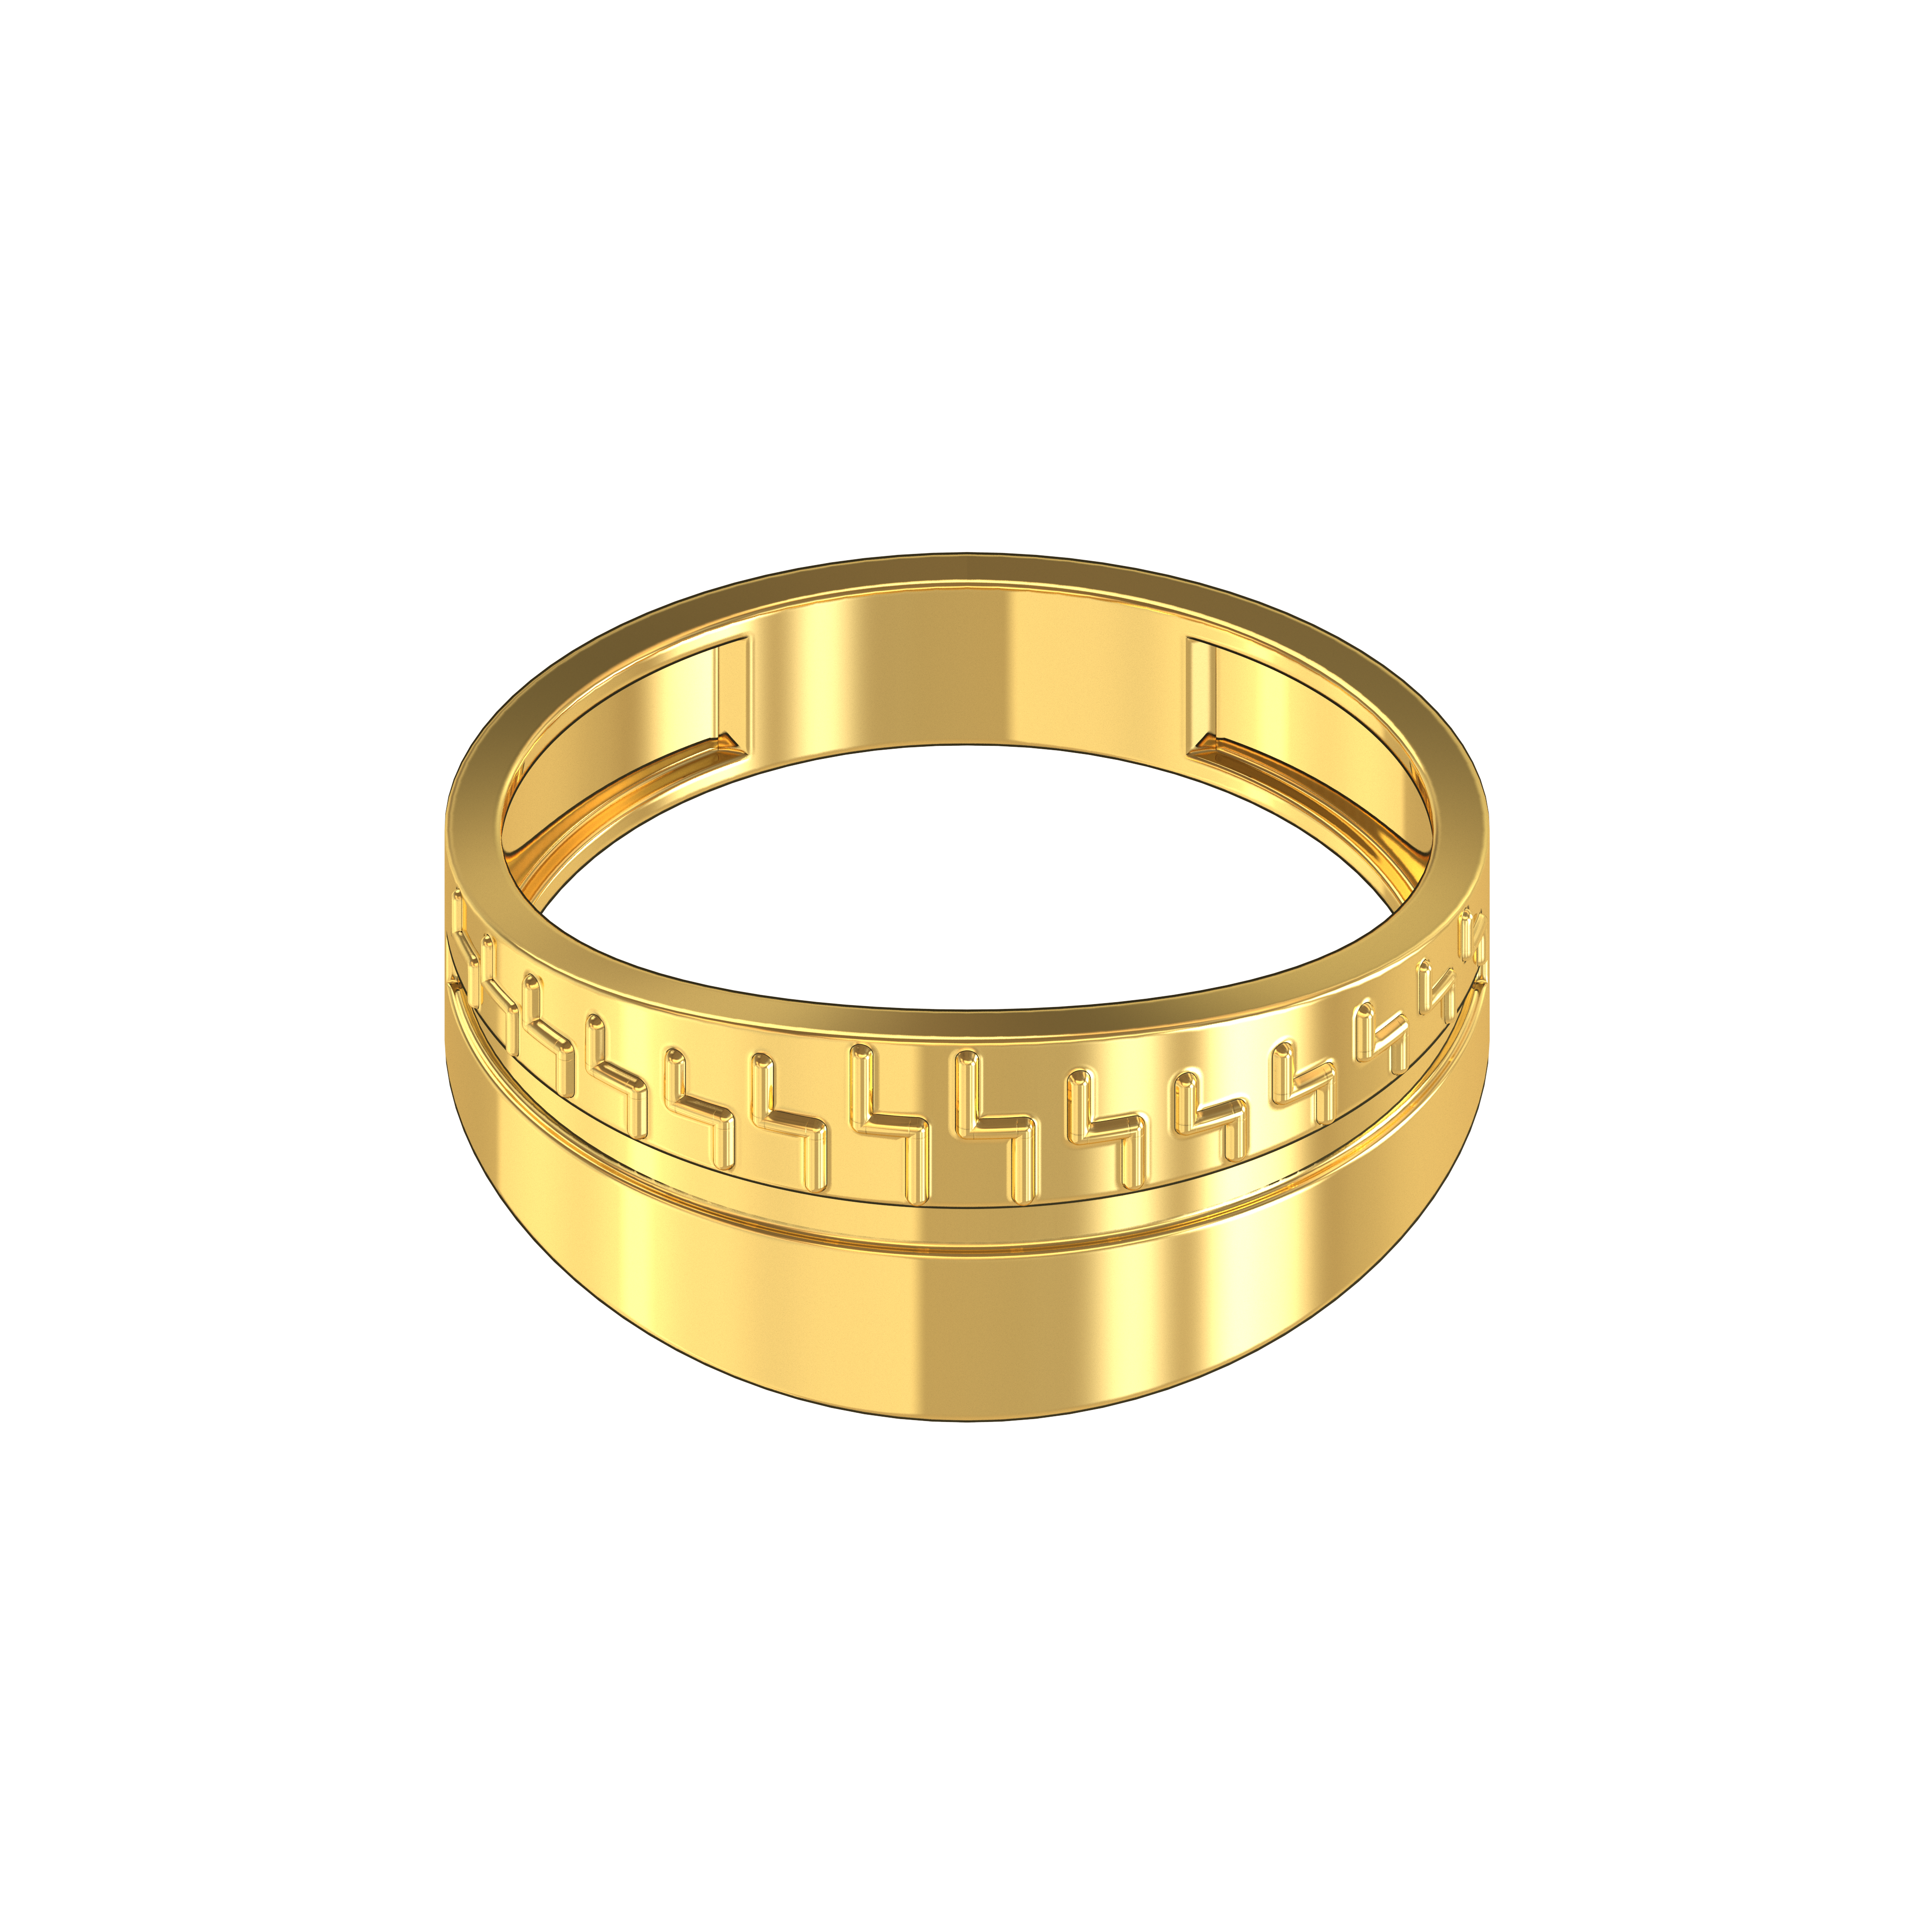 Latest Gold Gents Ring Designs | Rings for Men | Engagement Ring | Latest gold  ring designs, Gold ring designs, Gents gold ring